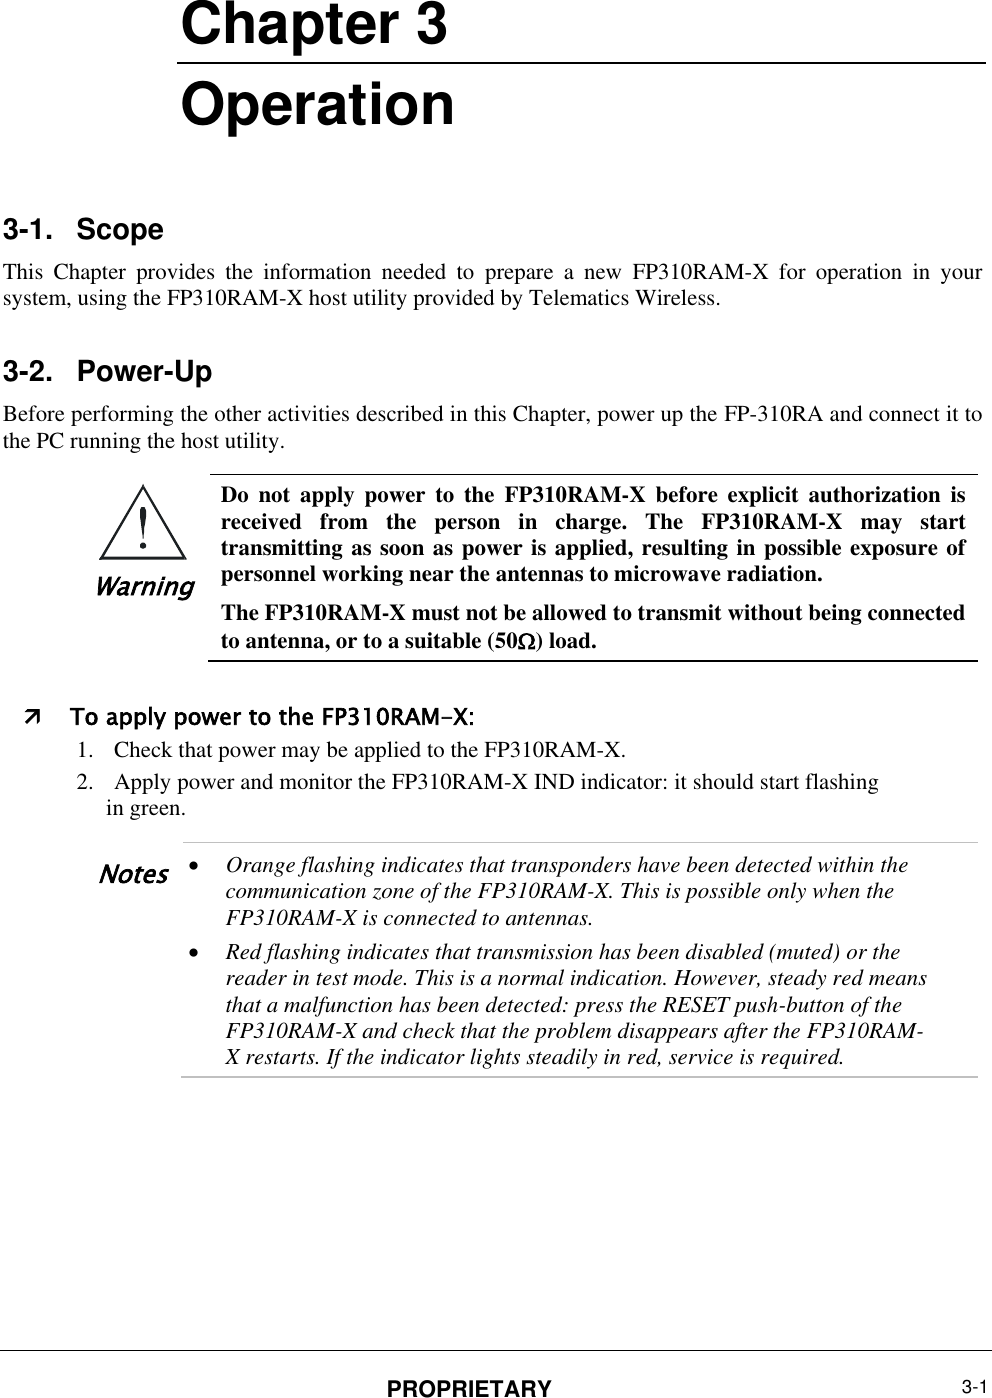  PROPRIETARY 3-1       Chapter ‎3 Operation 3-1.  Scope This  Chapter  provides  the  information  needed  to  prepare  a  new  FP310RAM-X  for  operation  in  your system, using the FP310RAM-X host utility provided by Telematics Wireless. 3-2.  Power-Up Before performing the other activities described in this Chapter, power up the FP-310RA and connect it to the PC running the host utility.  Warning Do  not  apply  power  to  the  FP310RAM-X  before  explicit  authorization  is received  from  the  person  in  charge.  The  FP310RAM-X  may  start transmitting as soon as power is applied, resulting in possible exposure of personnel working near the antennas to microwave radiation.  The FP310RAM-X must not be allowed to transmit without being connected to antenna, or to a suitable (50) load.   To apply power to the FP310RAM-X: 1. Check that power may be applied to the FP310RAM-X.  2. Apply power and monitor the FP310RAM-X IND indicator: it should start flashing in green.  Notes  Orange flashing indicates that transponders have been detected within the communication zone of the FP310RAM-X. This is possible only when the FP310RAM-X is connected to antennas.  Red flashing indicates that transmission has been disabled (muted) or the reader in test mode. This is a normal indication. However, steady red means that a malfunction has been detected: press the RESET push-button of the FP310RAM-X and check that the problem disappears after the FP310RAM-X restarts. If the indicator lights steadily in red, service is required.   